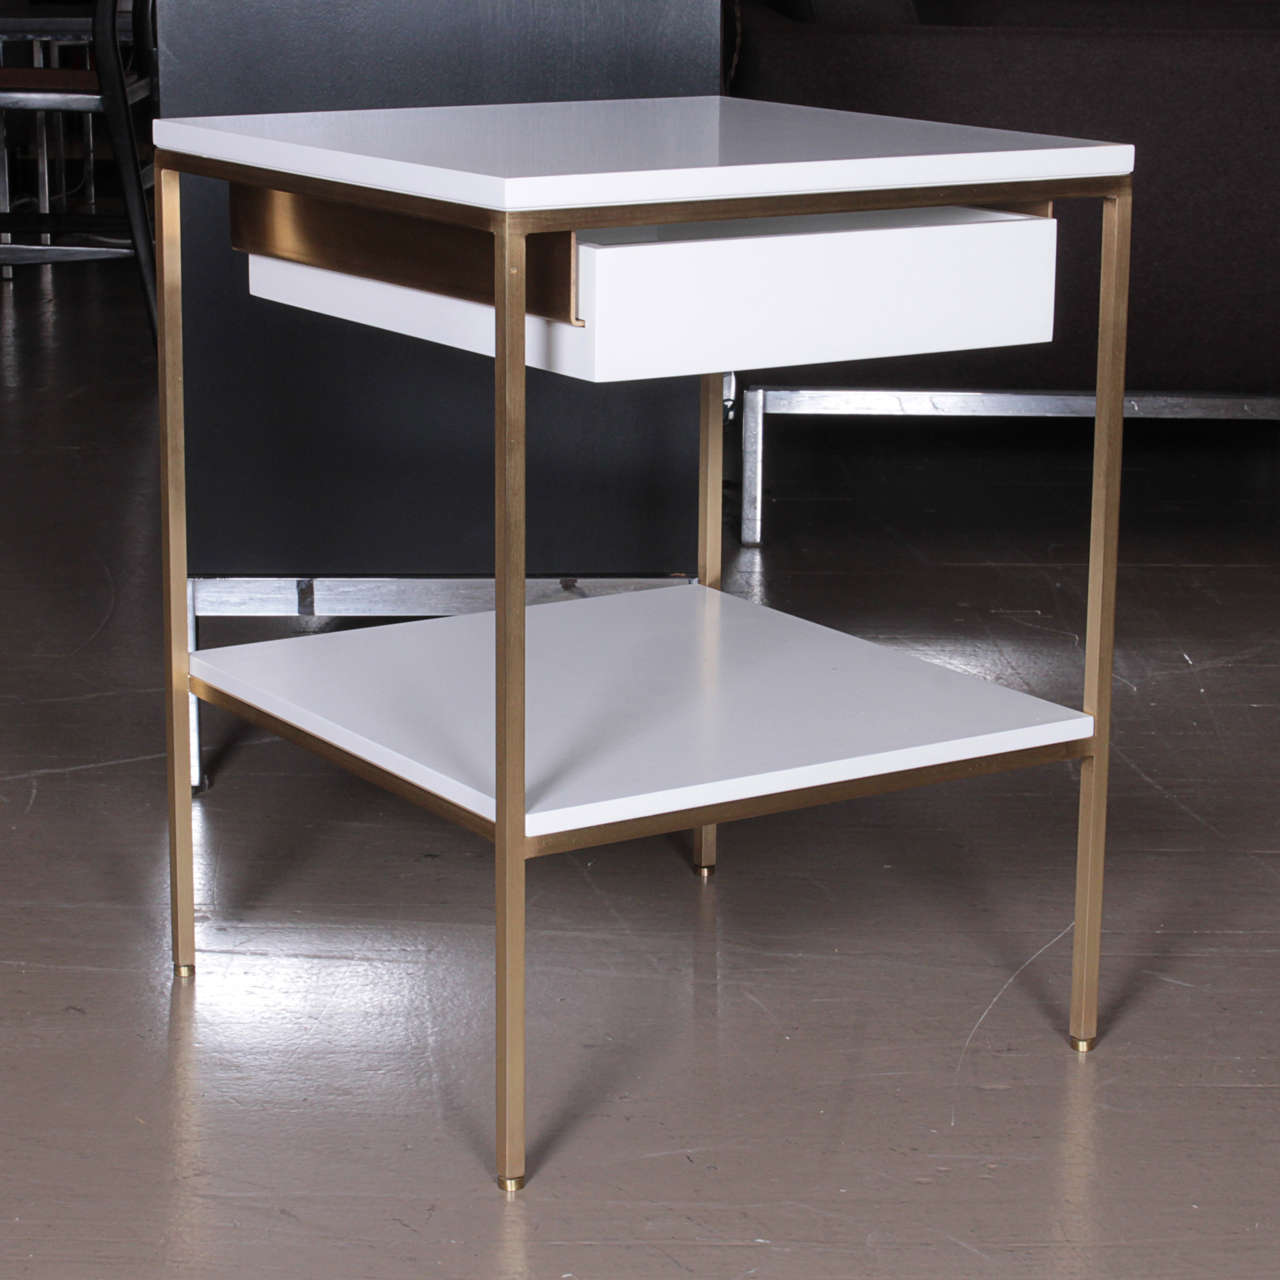 reGeneration satin lacquer and brass bedside tables shown here in our standard, BM soft chamois satin white lacquer.  Metal finishes are solid brass, stainless steel, or powder coat.  